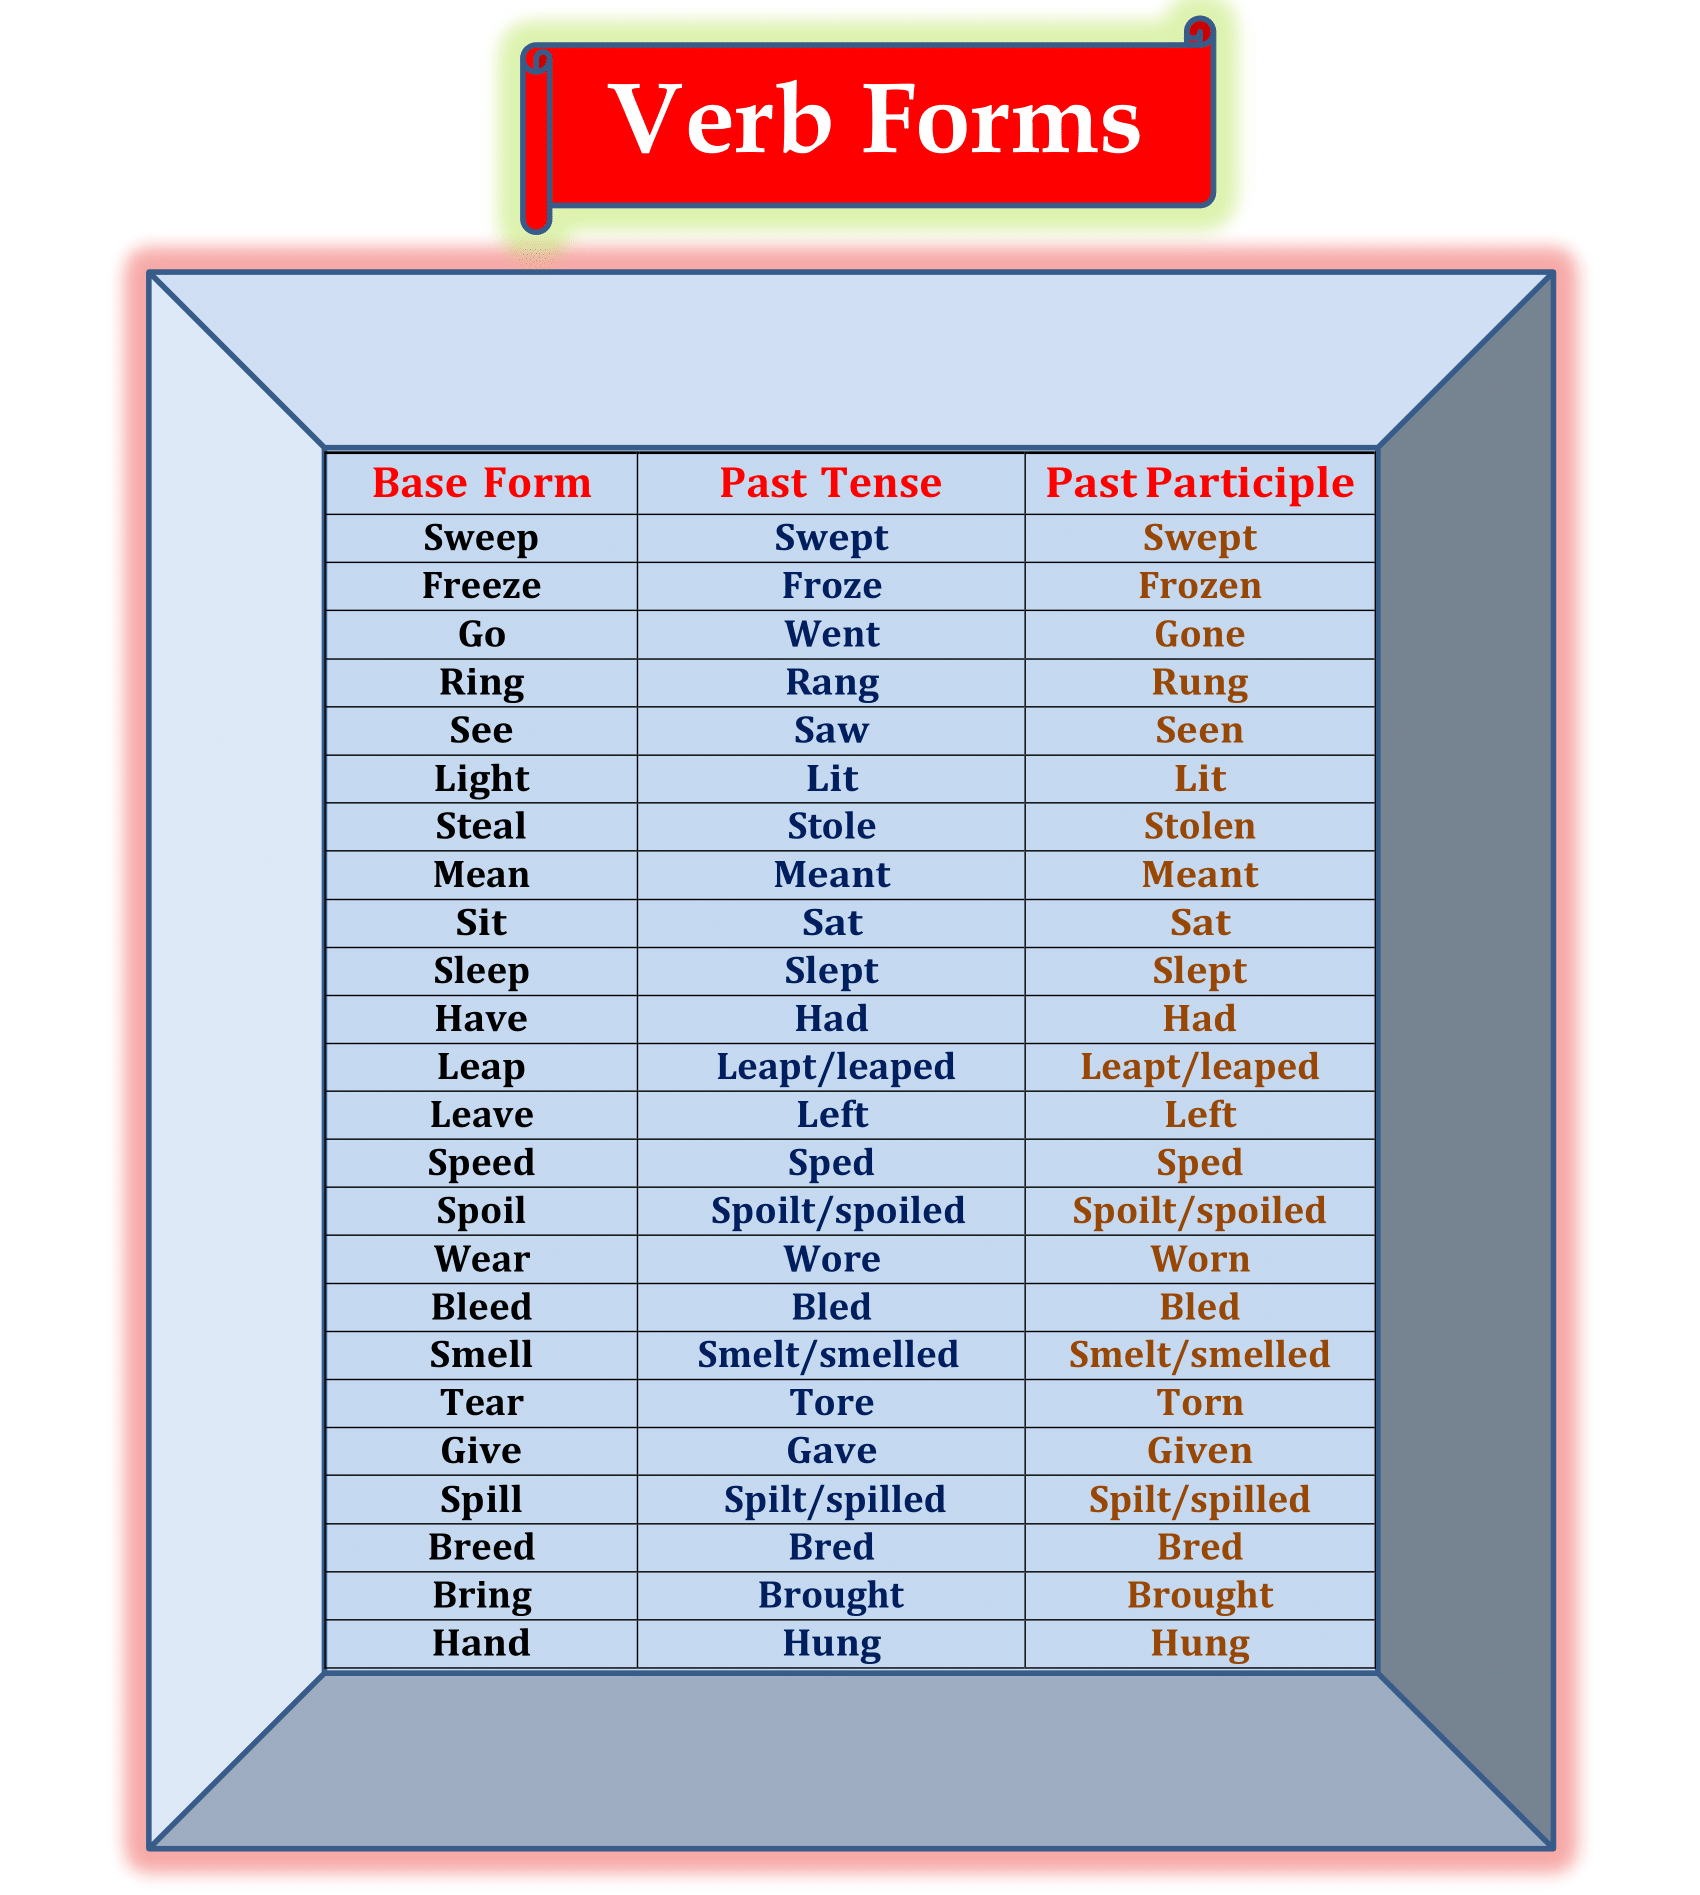 200 English Verbs List Meaning And V1 V2 V3 Form In 2021 English ...